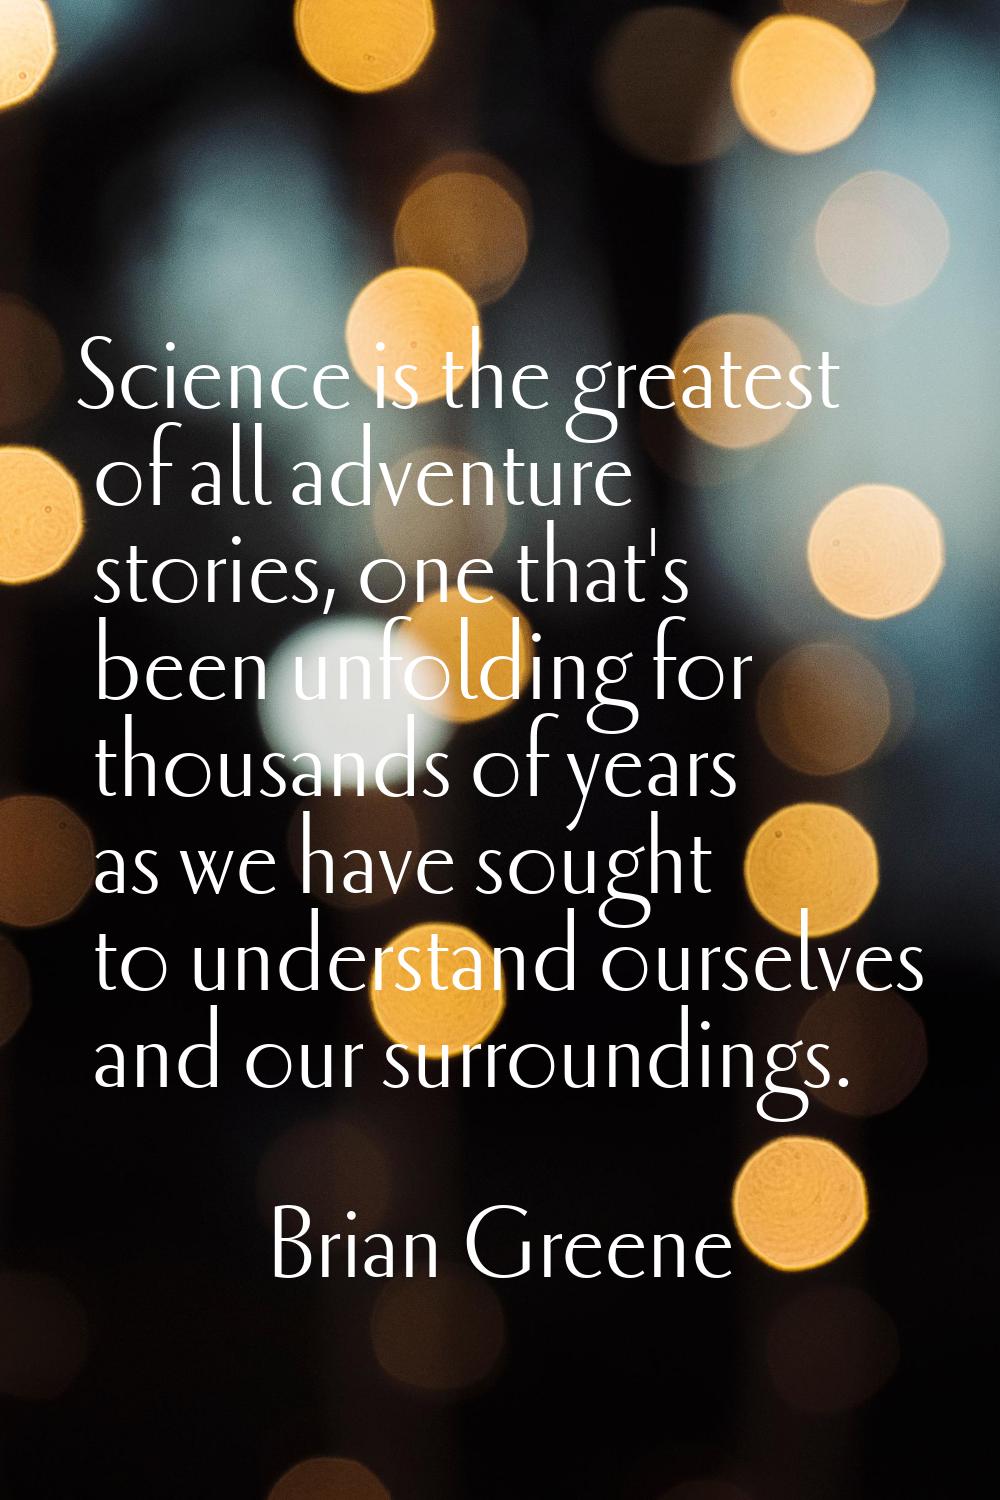 Science is the greatest of all adventure stories, one that's been unfolding for thousands of years 